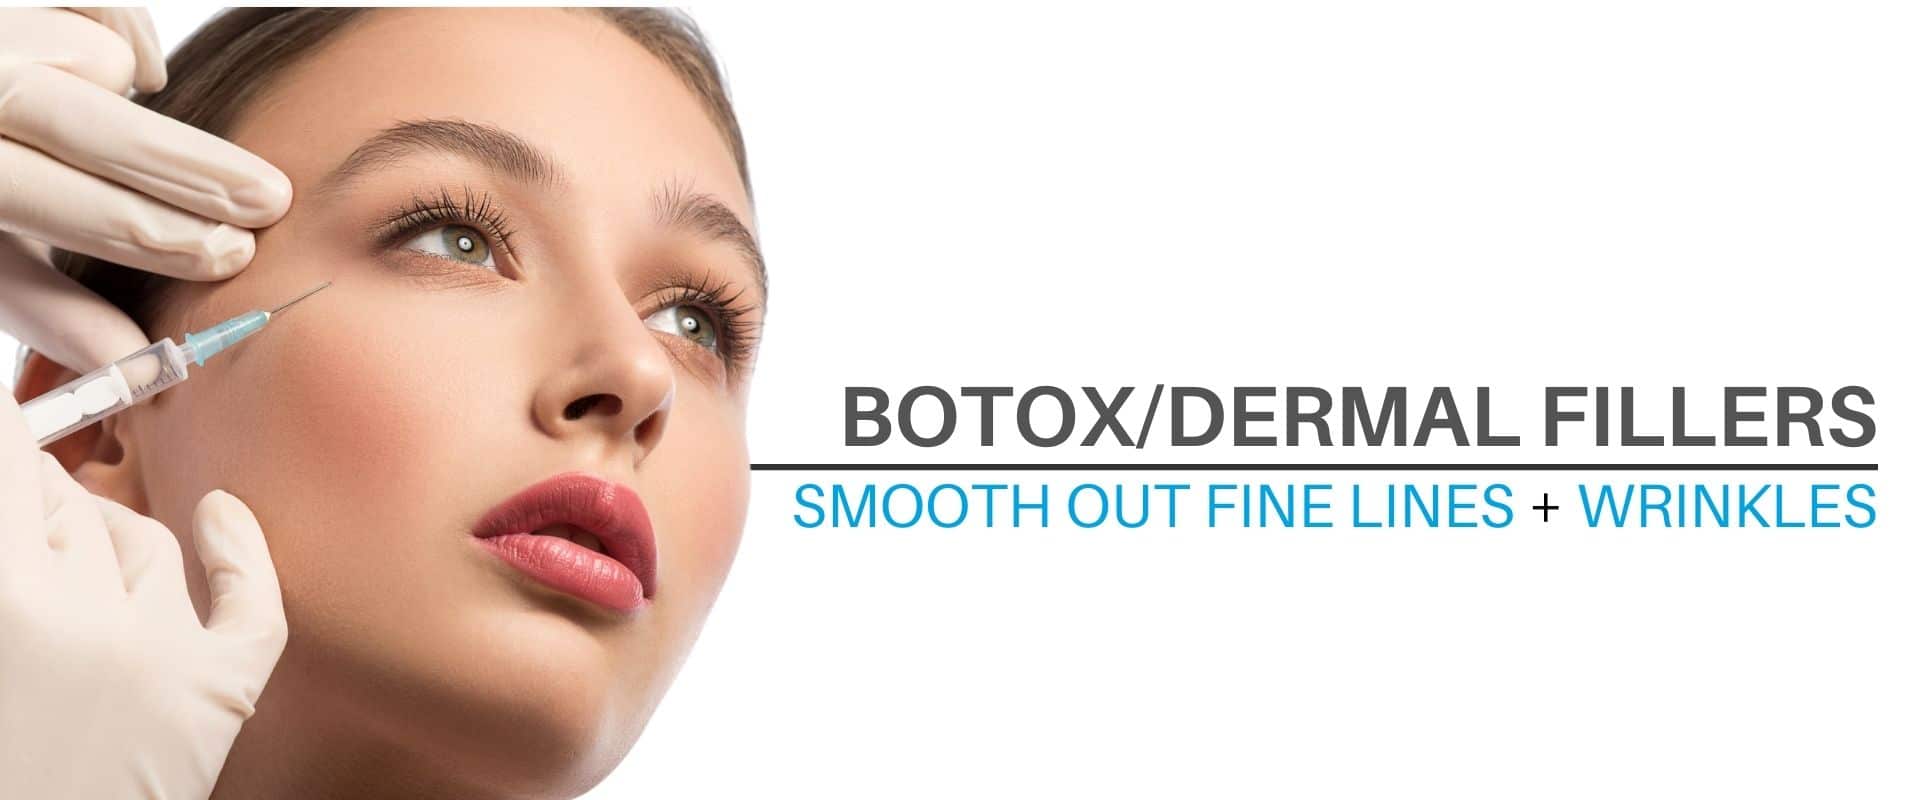 Botox & Dermal Fillers | FDA Cleared | Smooth Out Fine Lines, Wrinkles